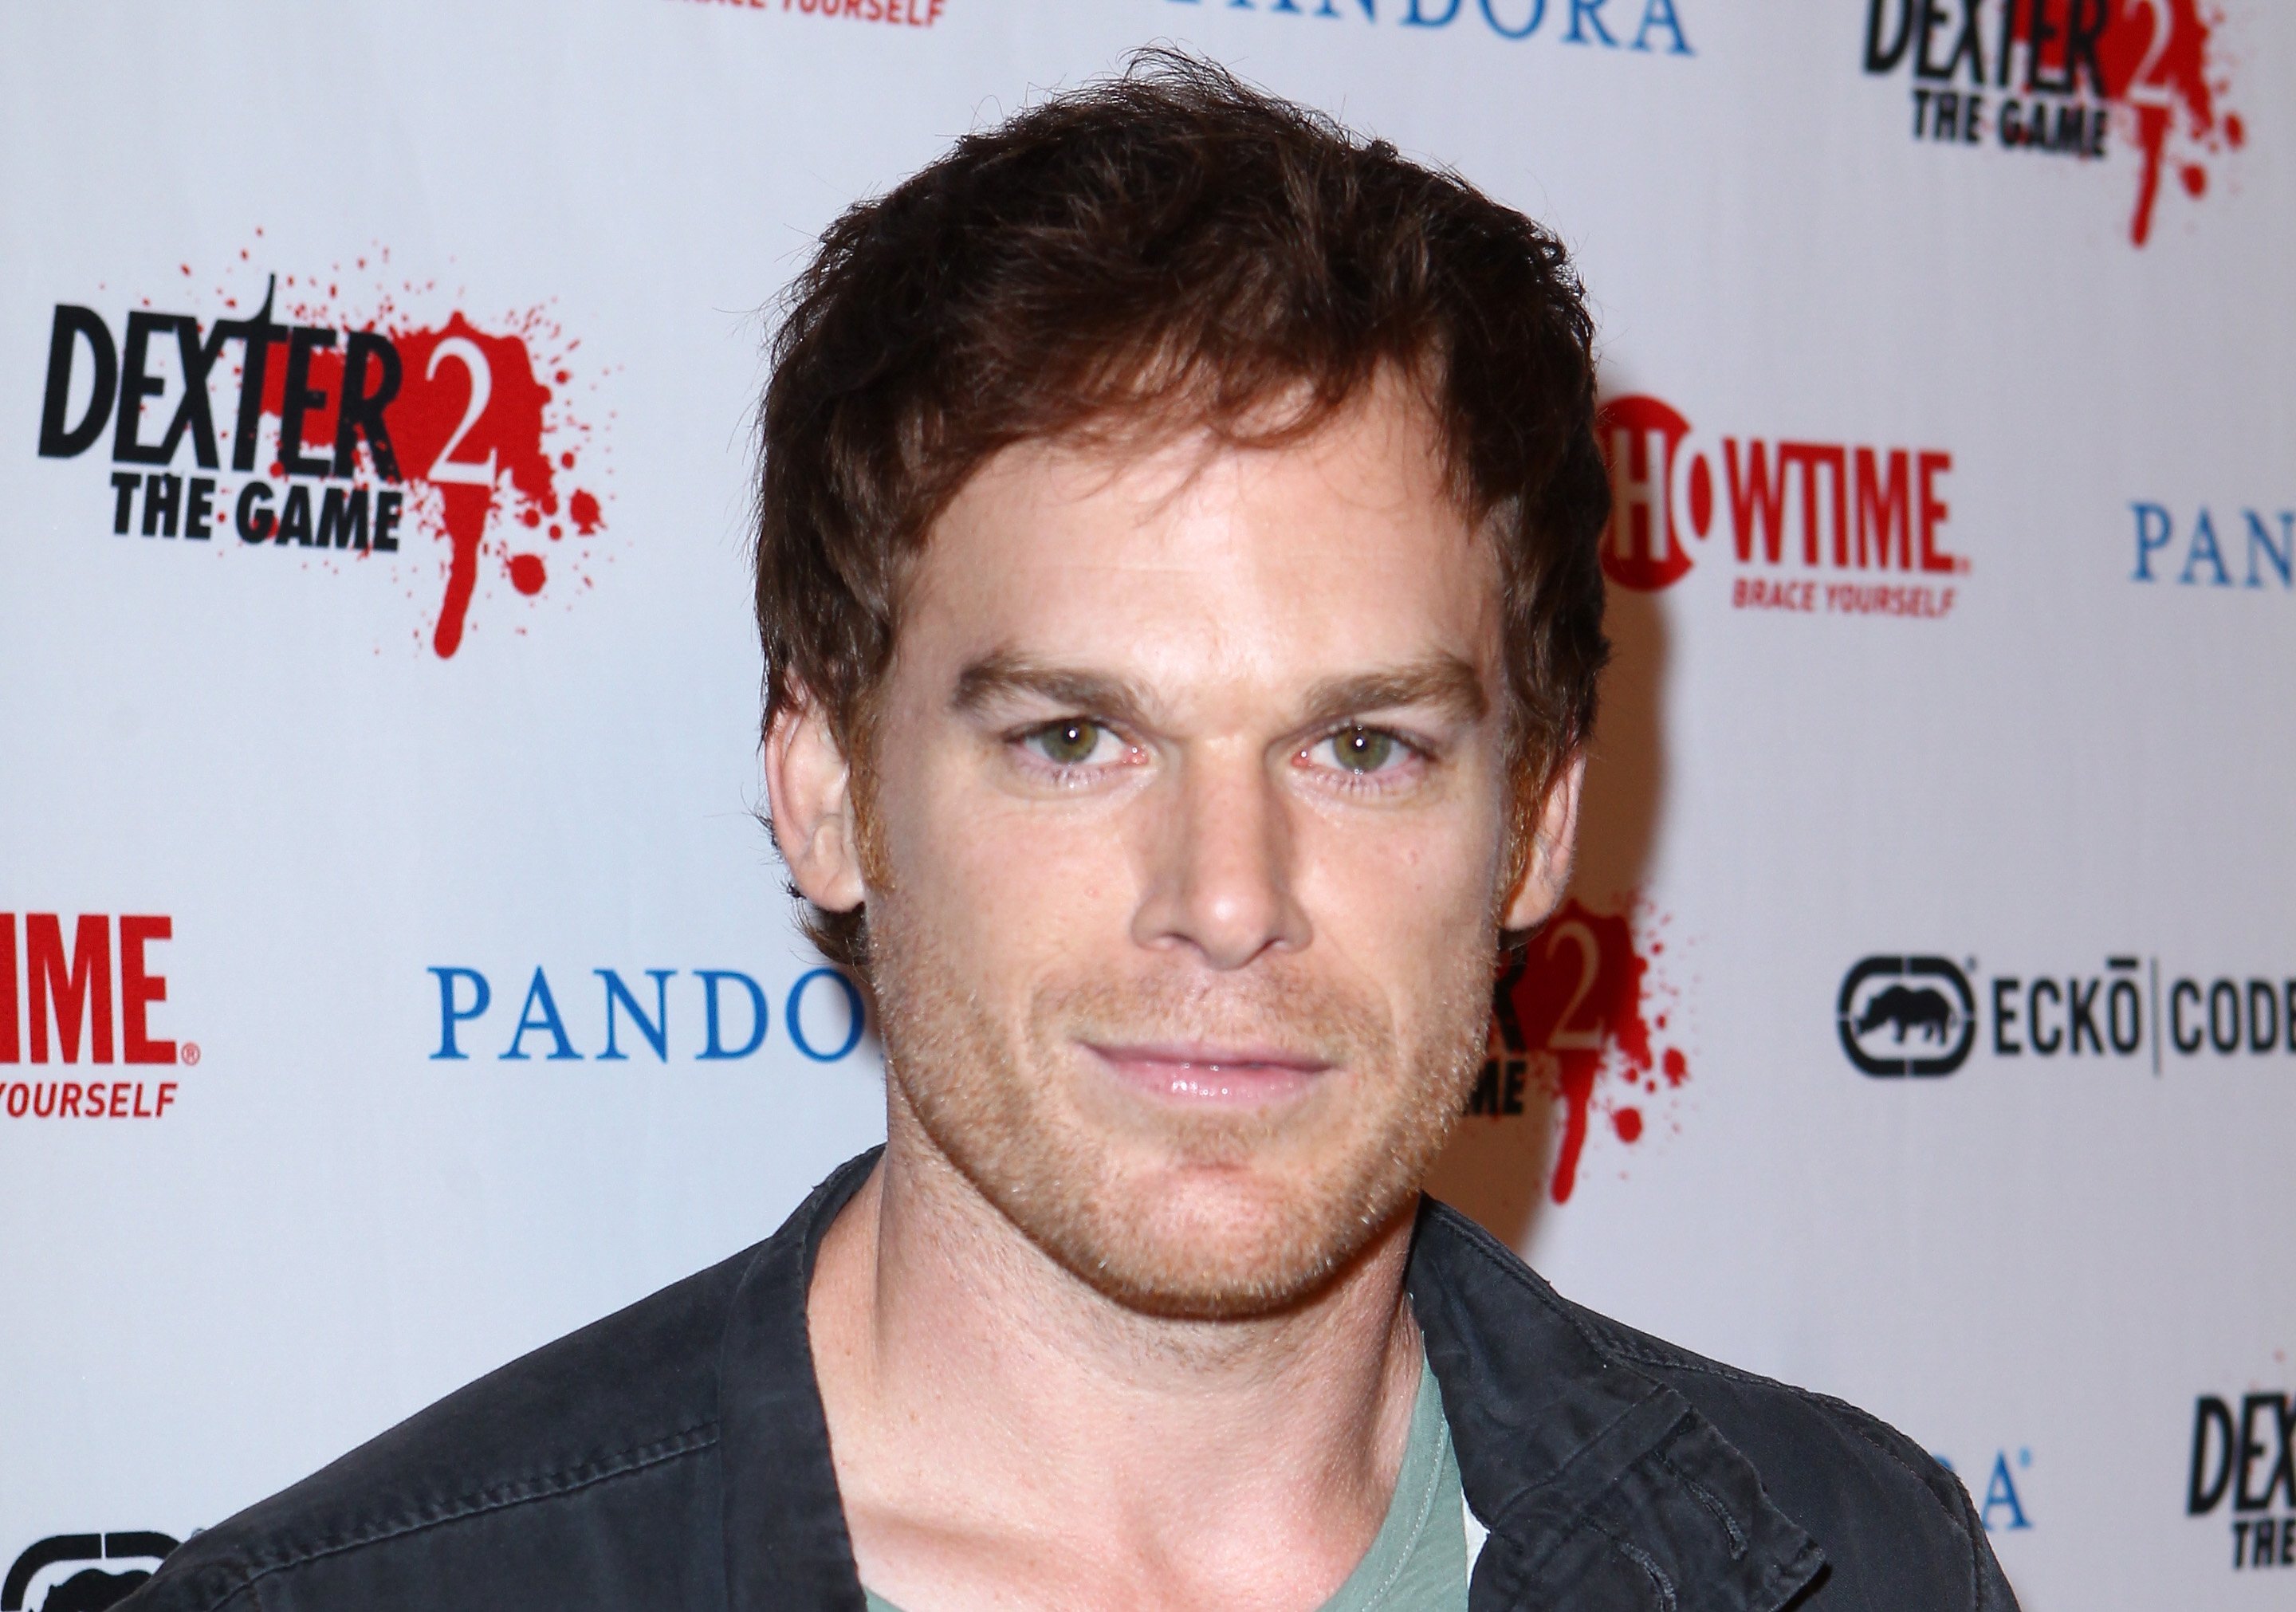 Michael C. Hall on the red carpet